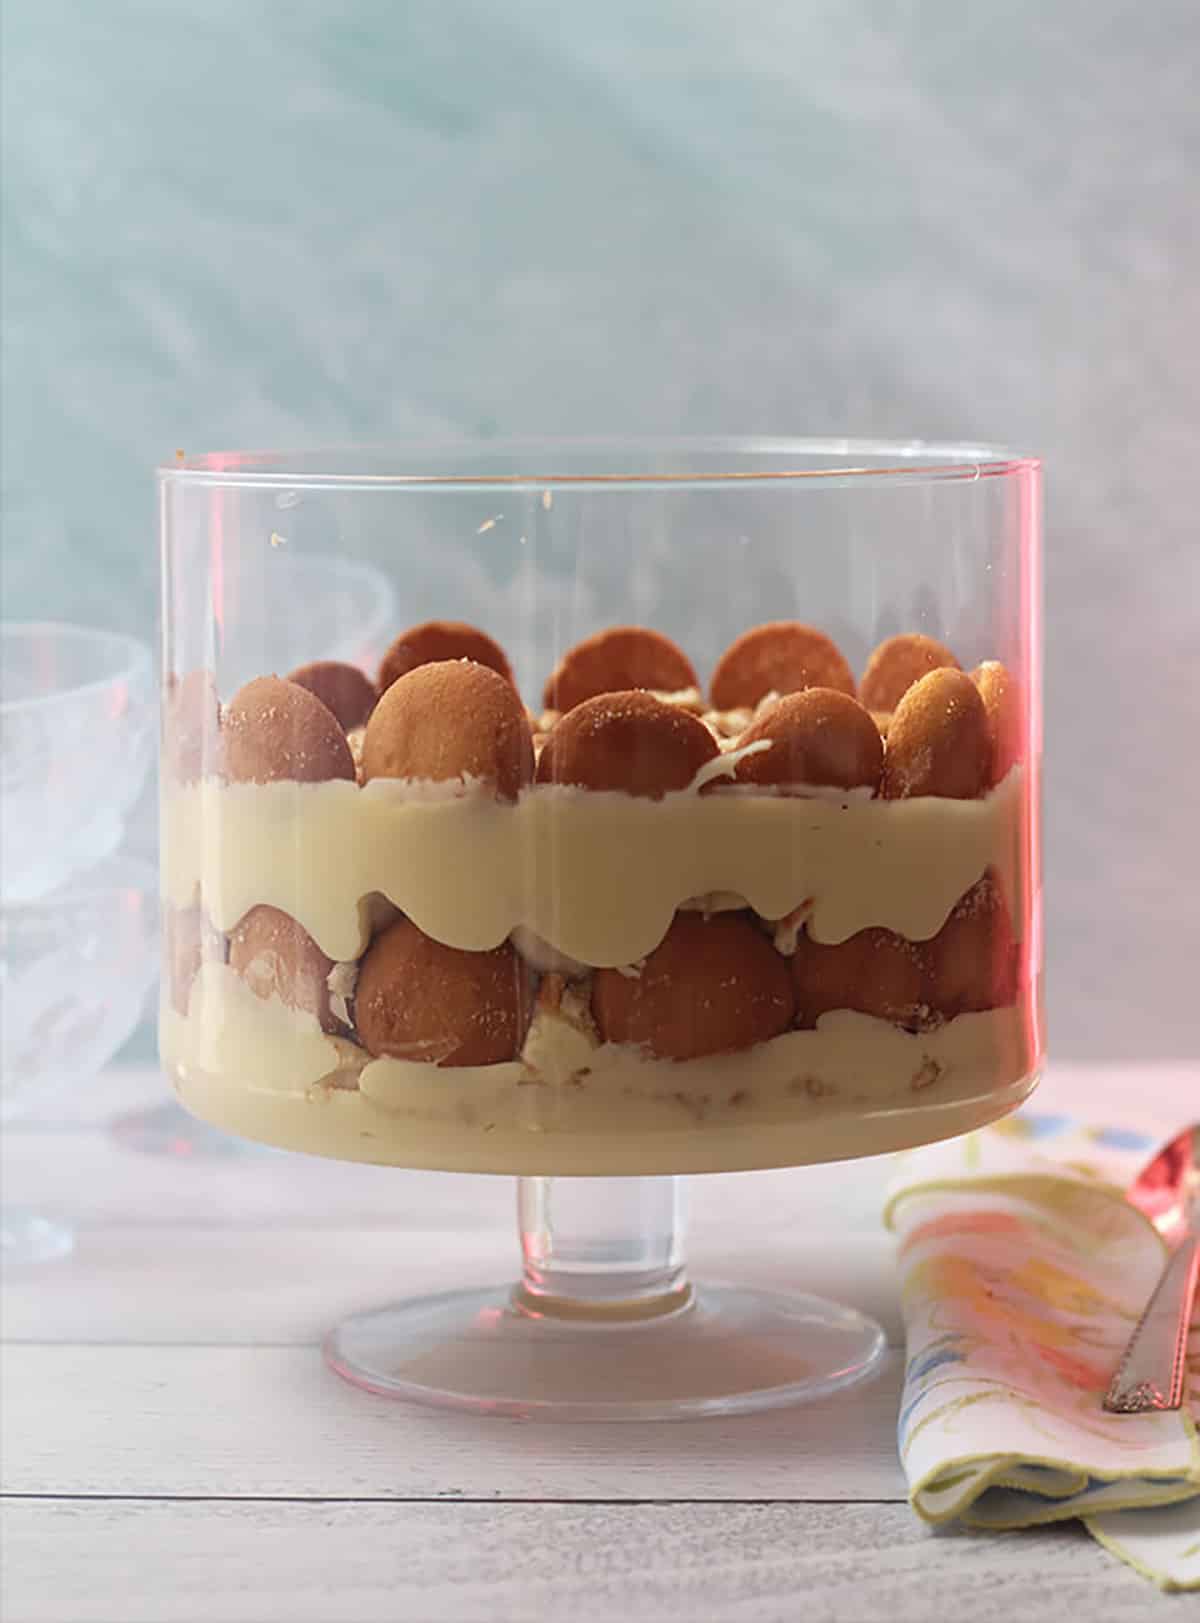 A trifle dessert with layers of custard, bananas, and vanilla wafers in a glass bowl.